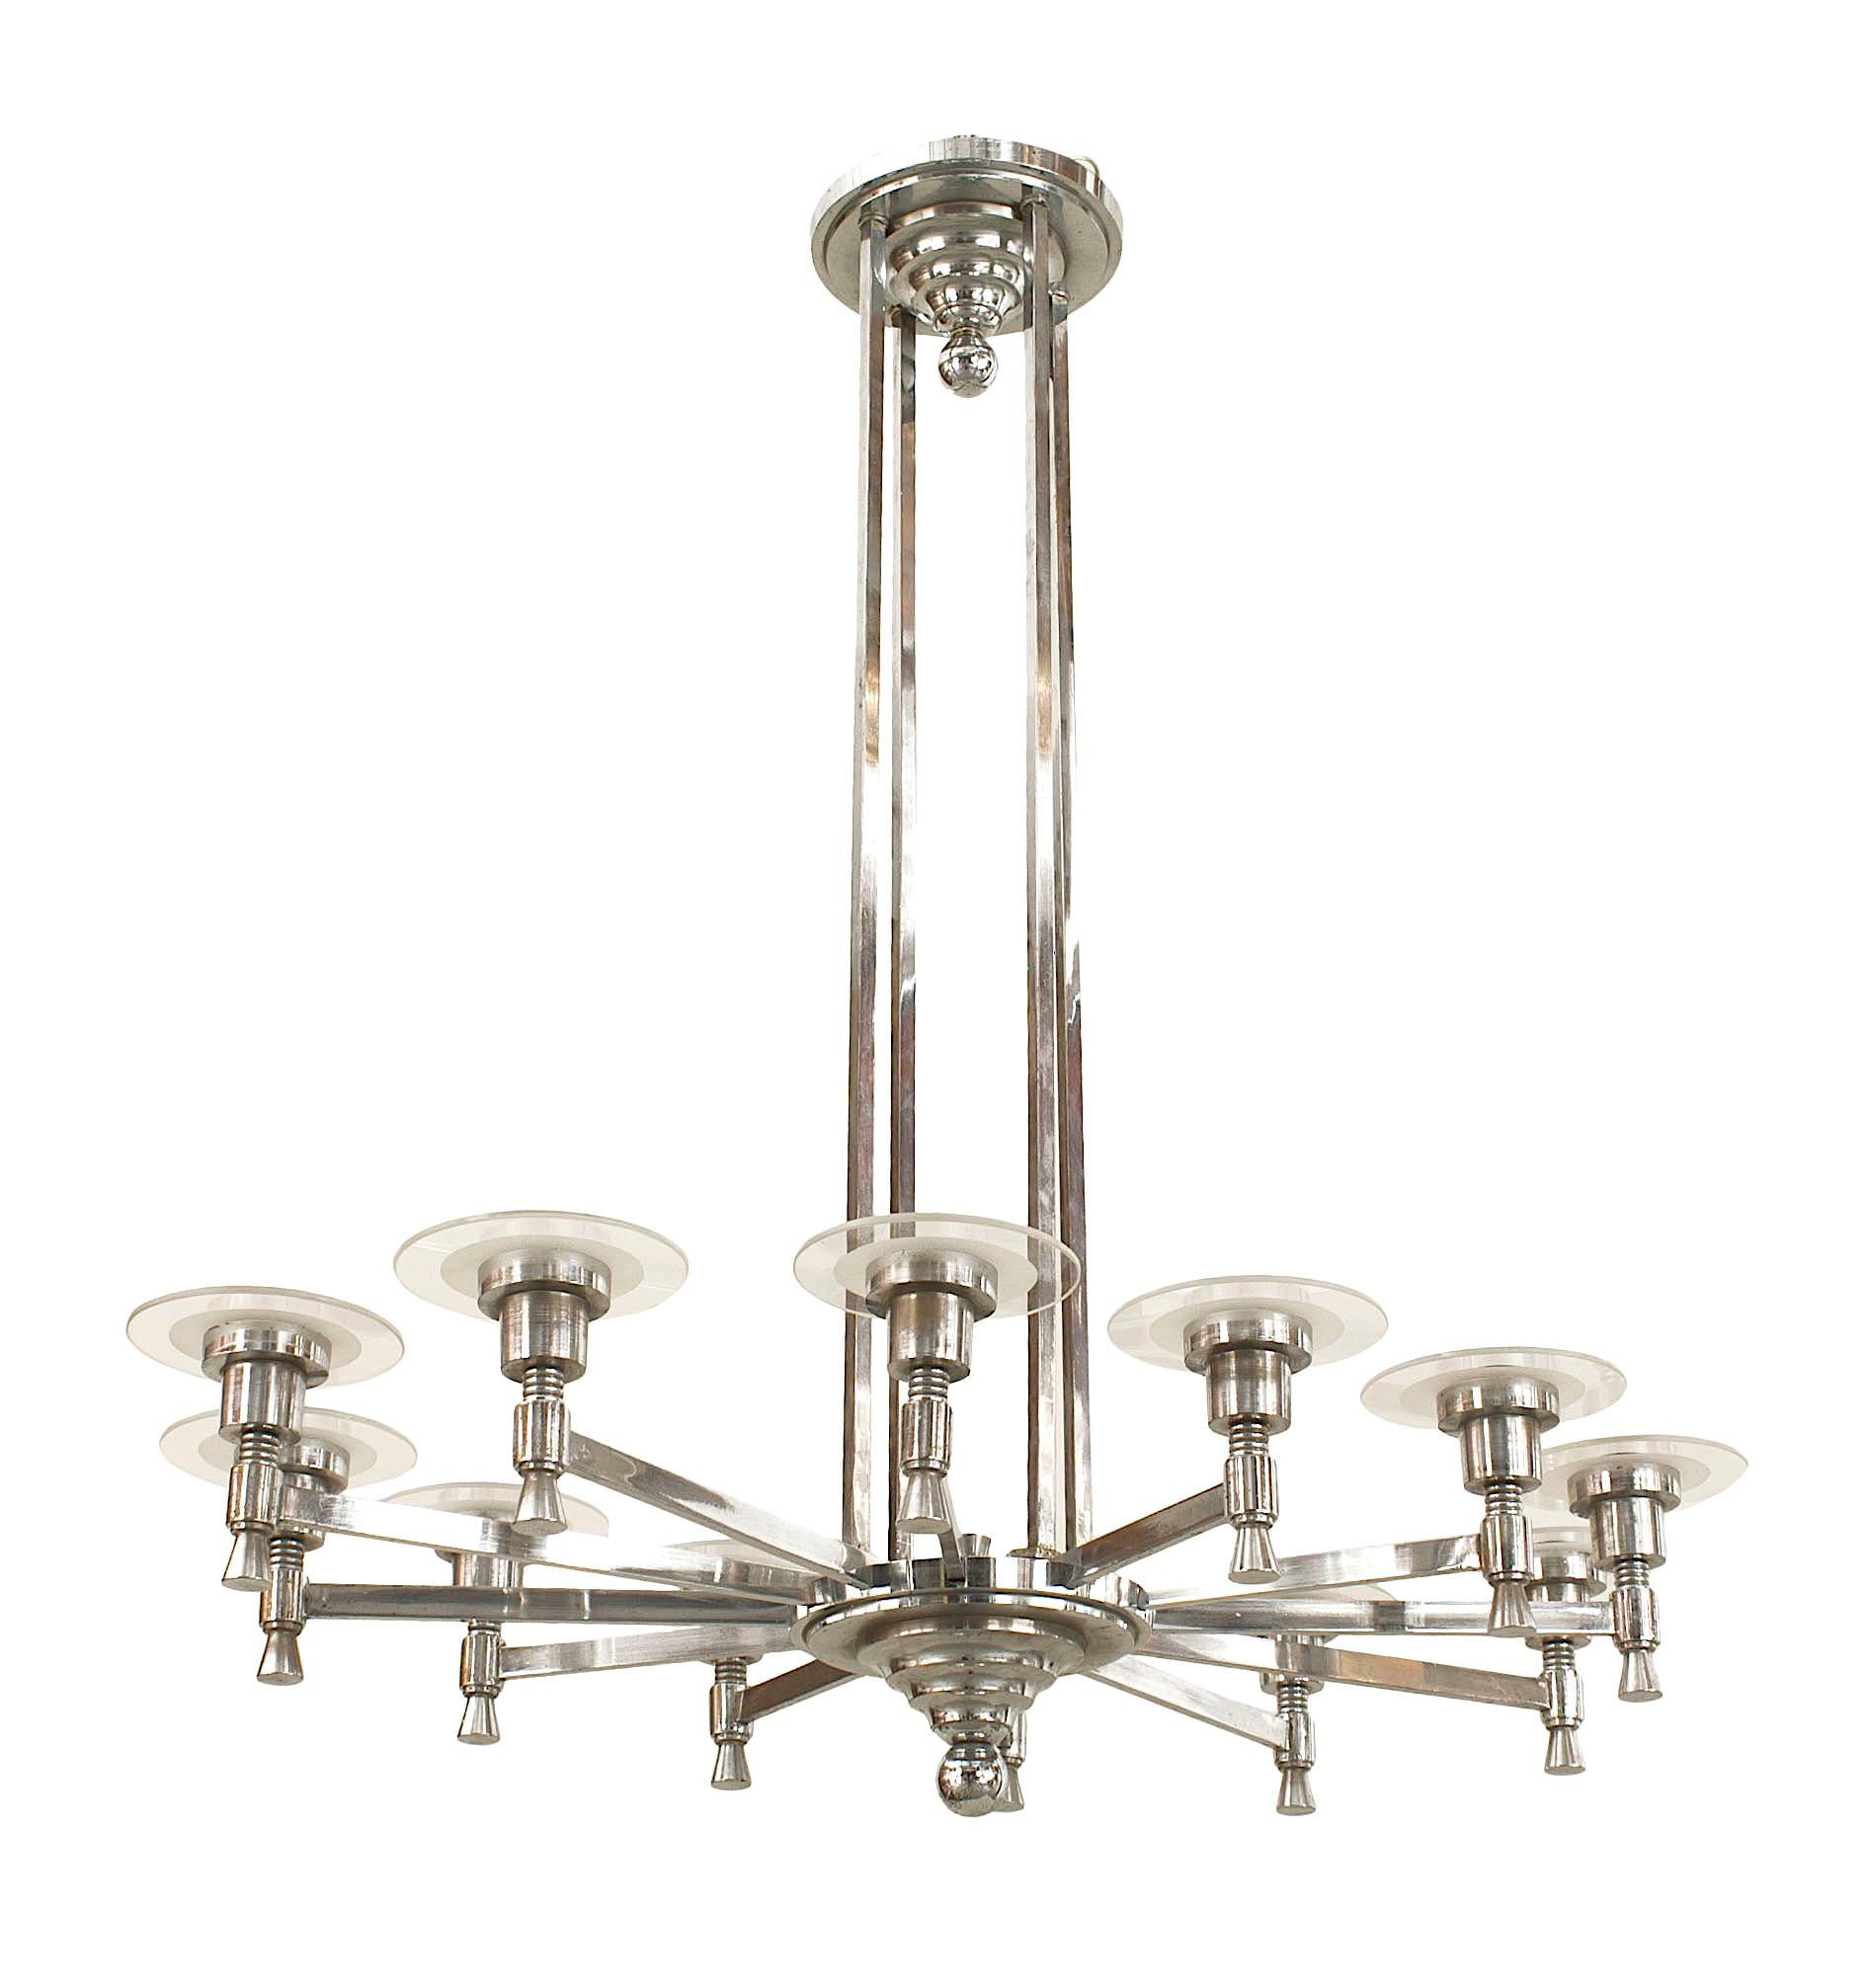 French 1940s chrome plated oval shaped Modernist 12 arm chandelier supported by 4 center post shafts with clear & frosted Lucite bobeches and a tiered finial bottom.

